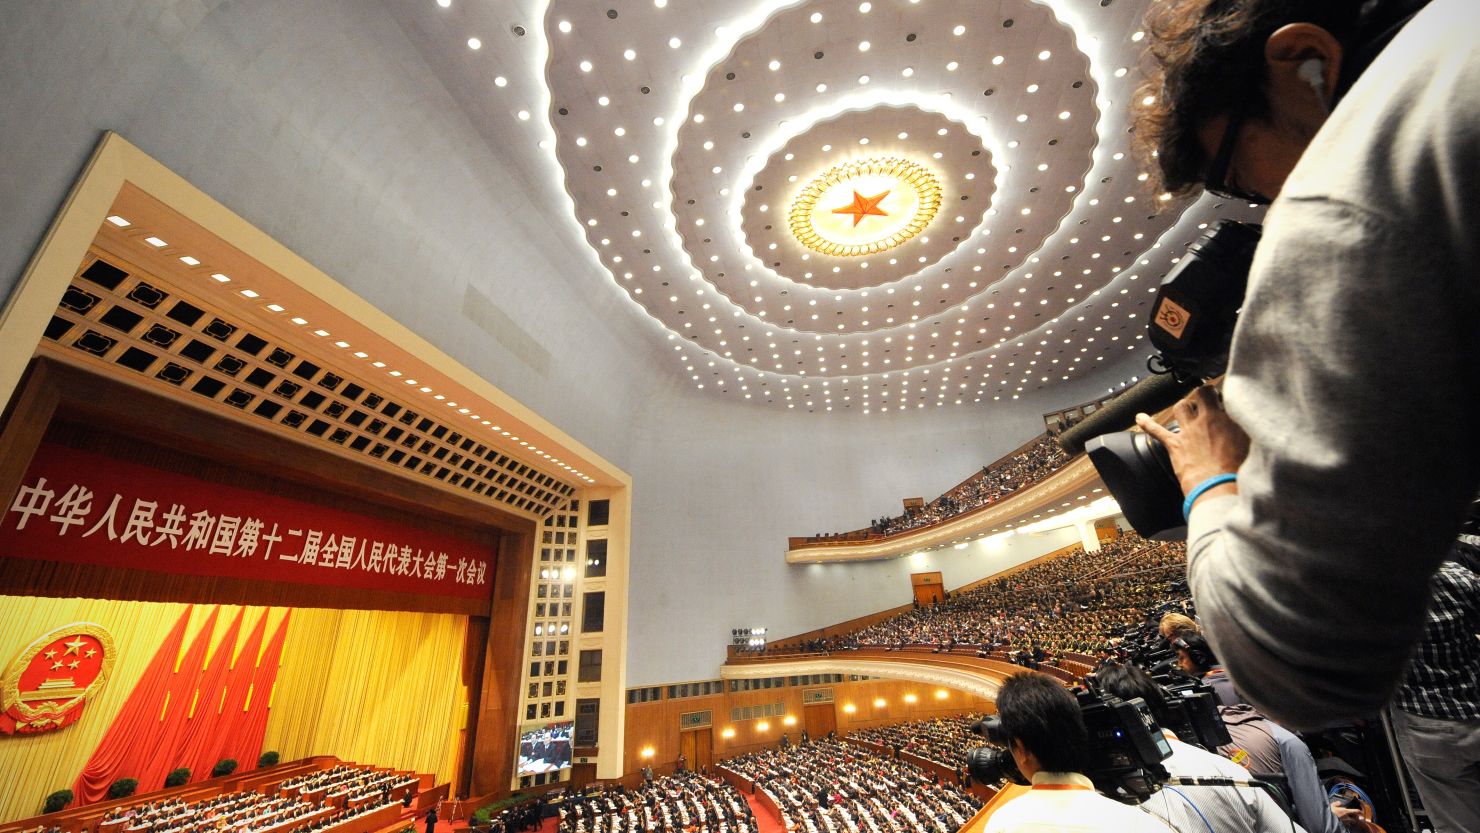 Inside the Great Hall of the People during the opening session of the National People's Congress , Beijing, March 5, 2013.